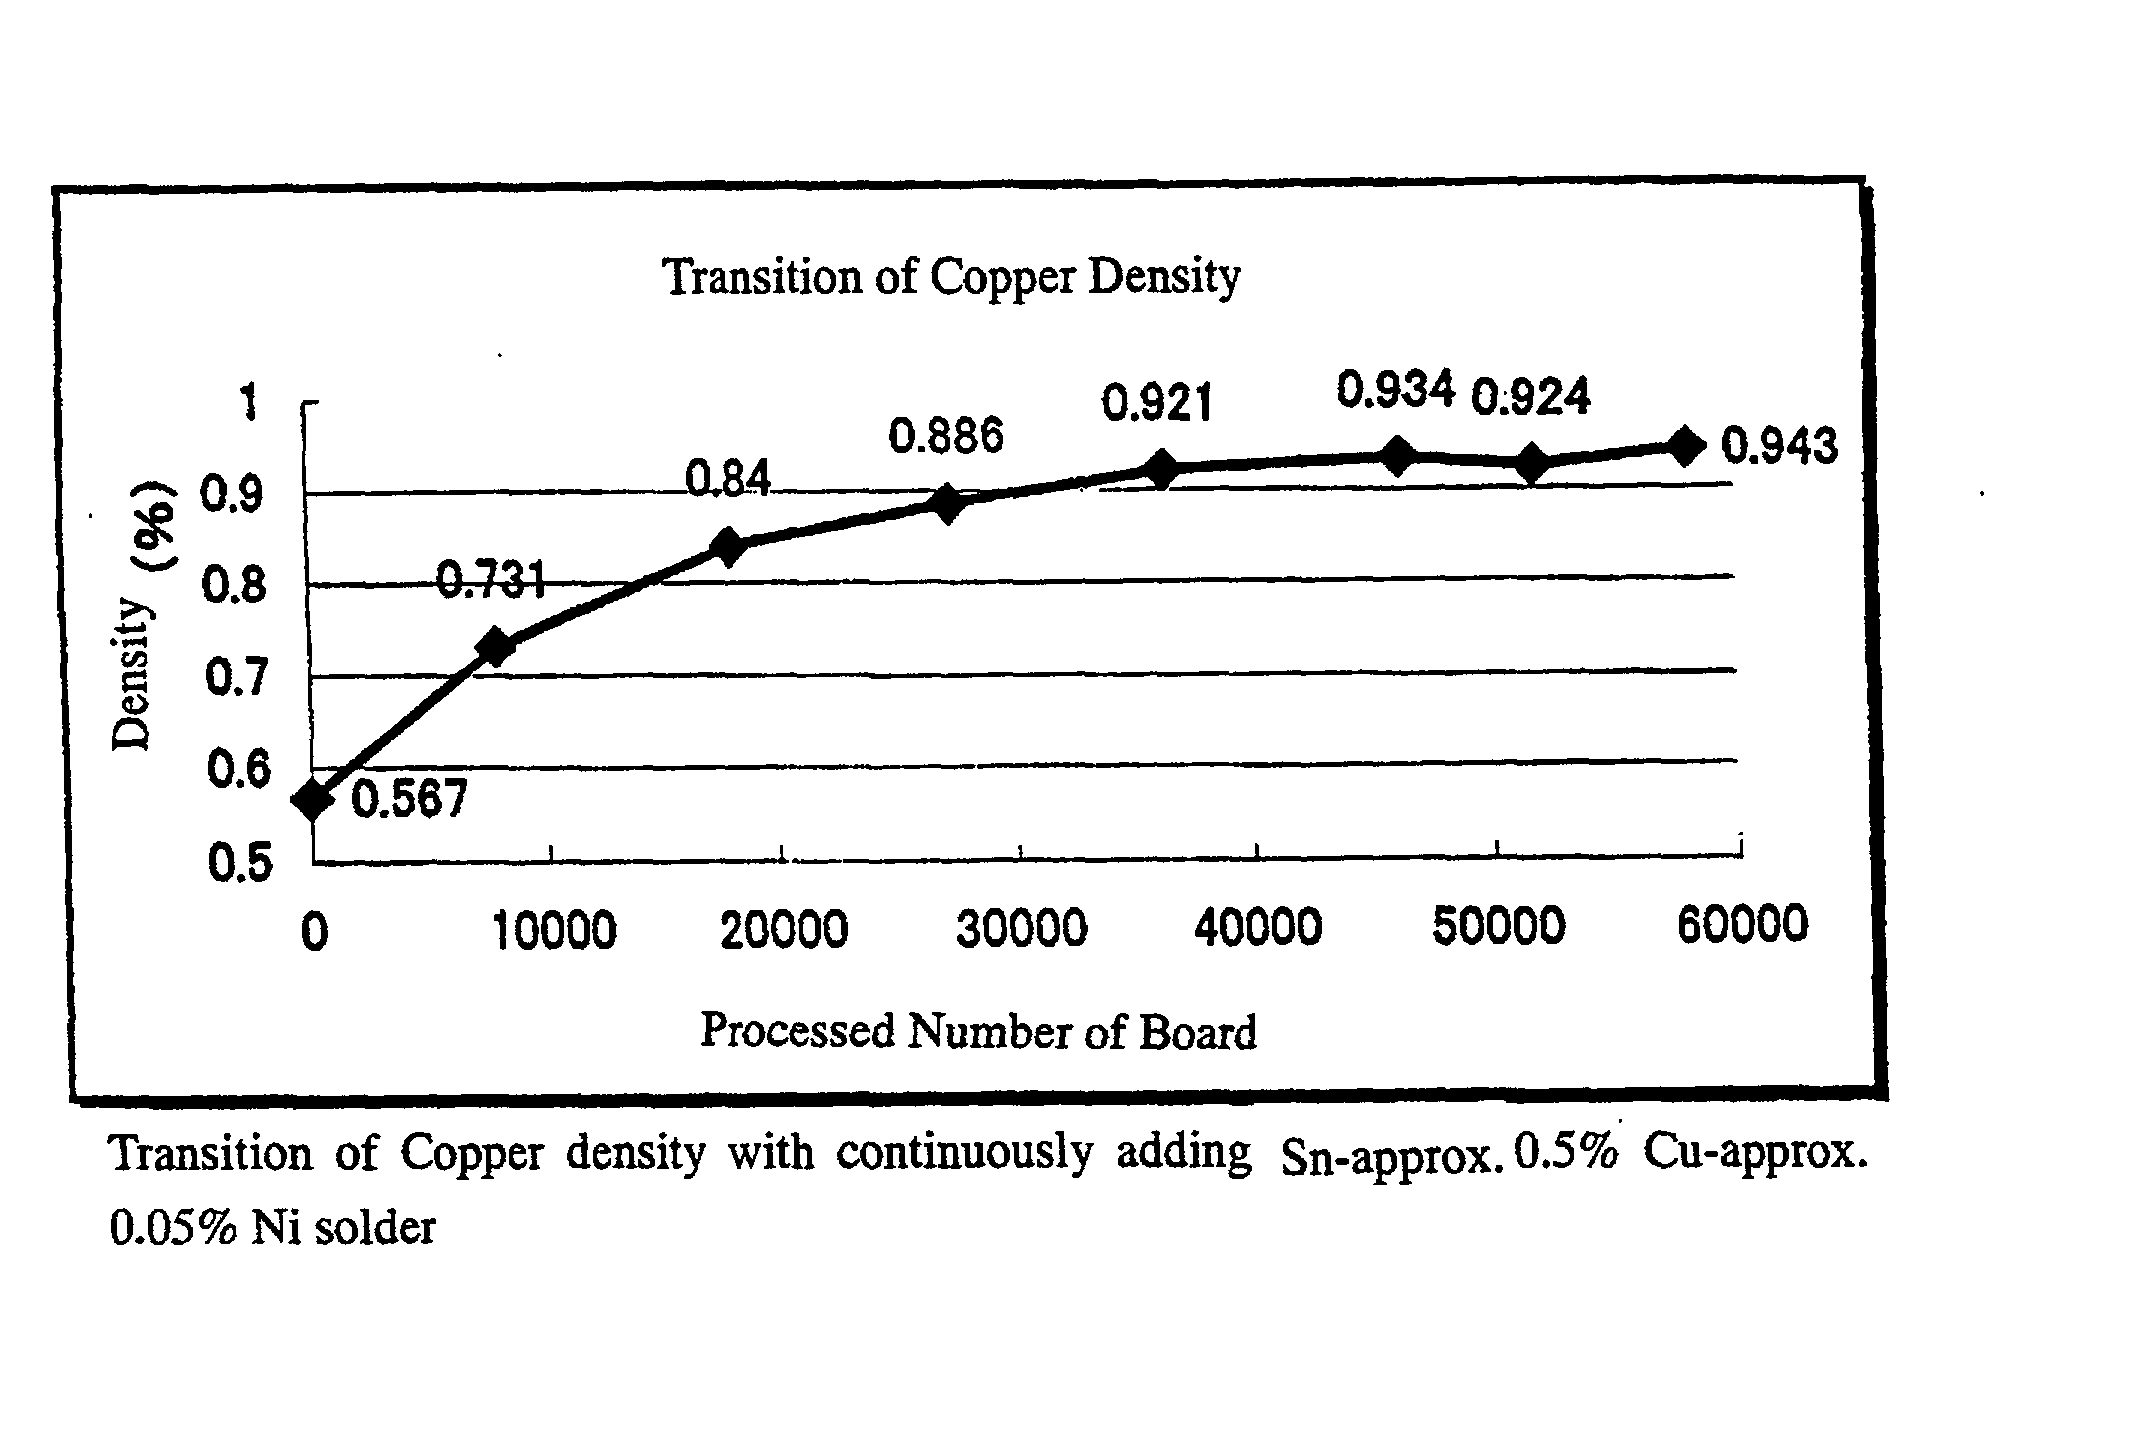 A control method for copper density in a solder dipping bath